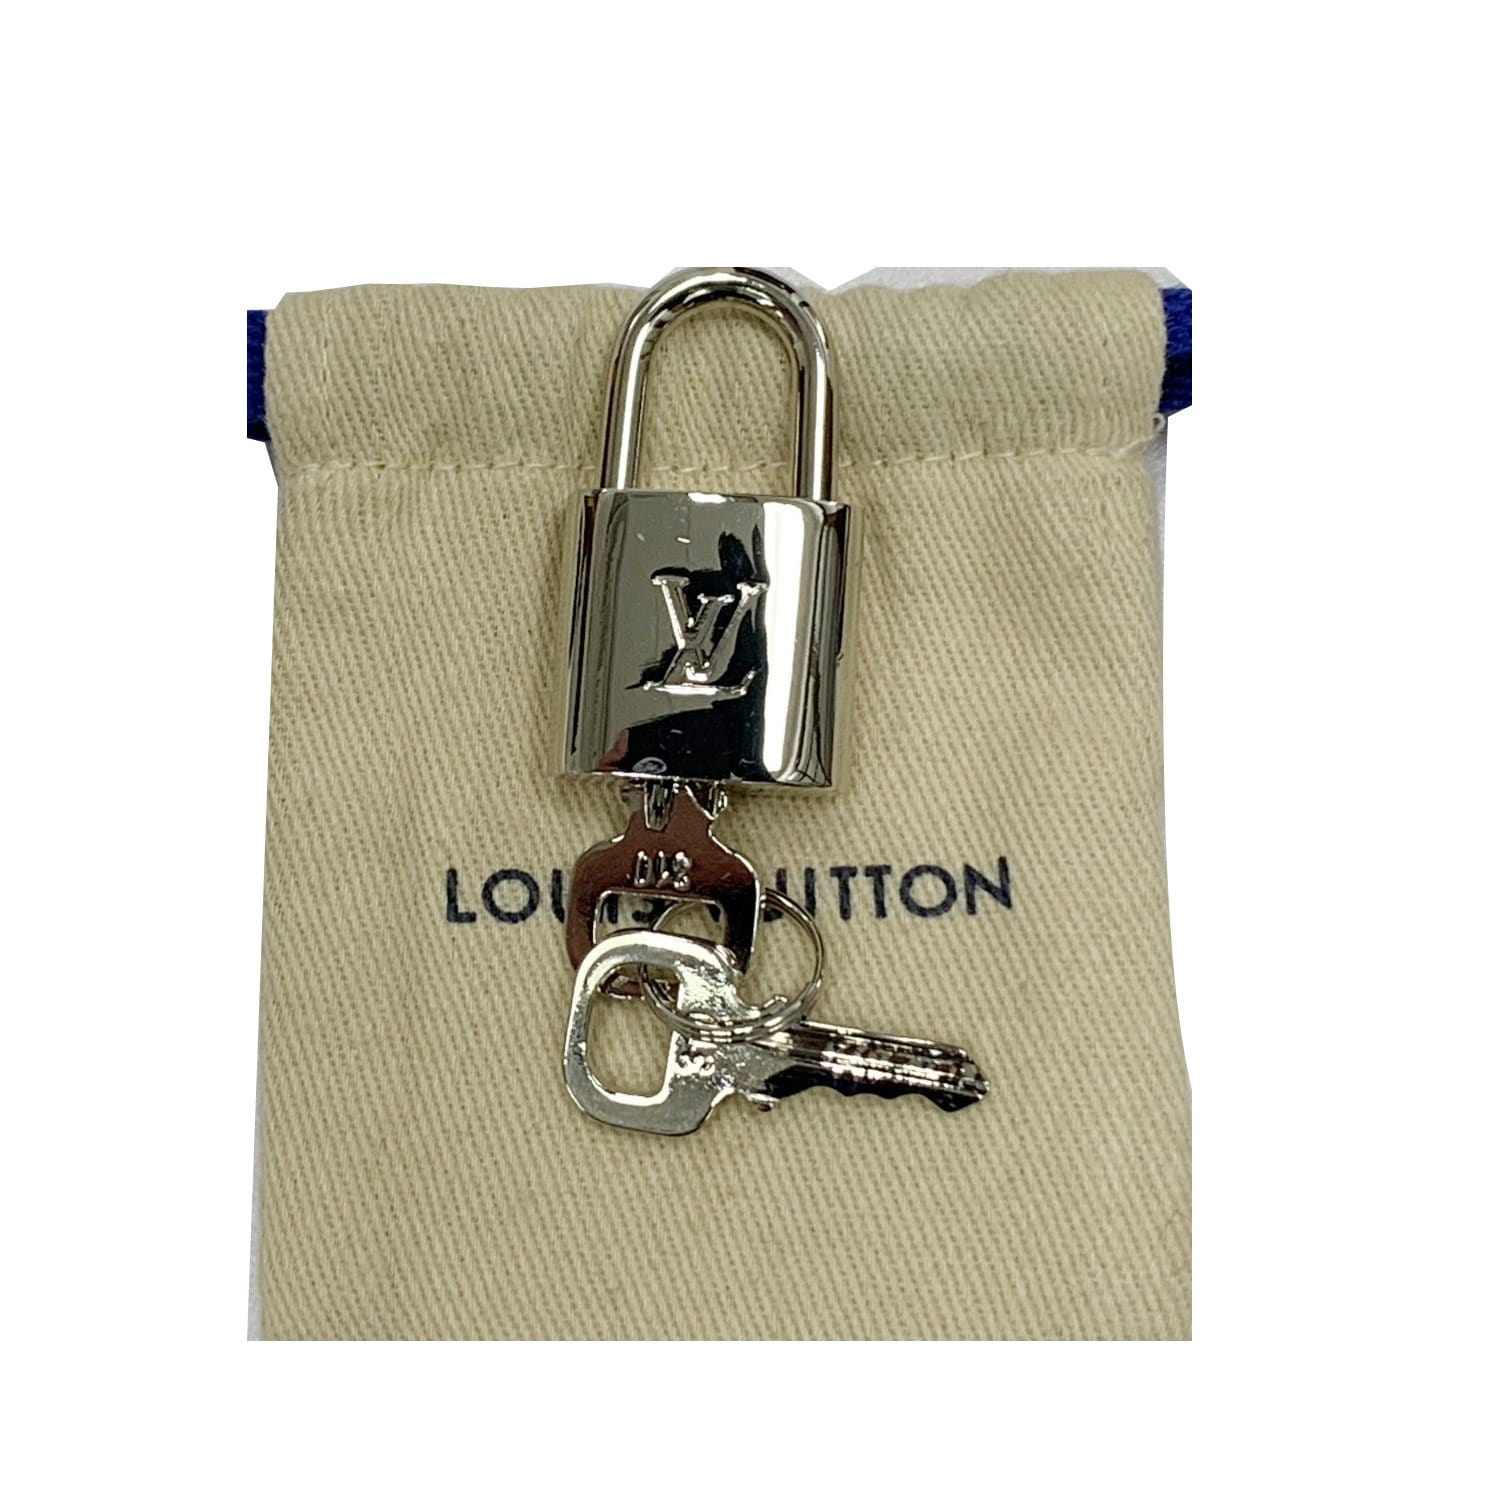 Pinkerly Special Louis Vuitton Padlock and One Key 310 Lock 